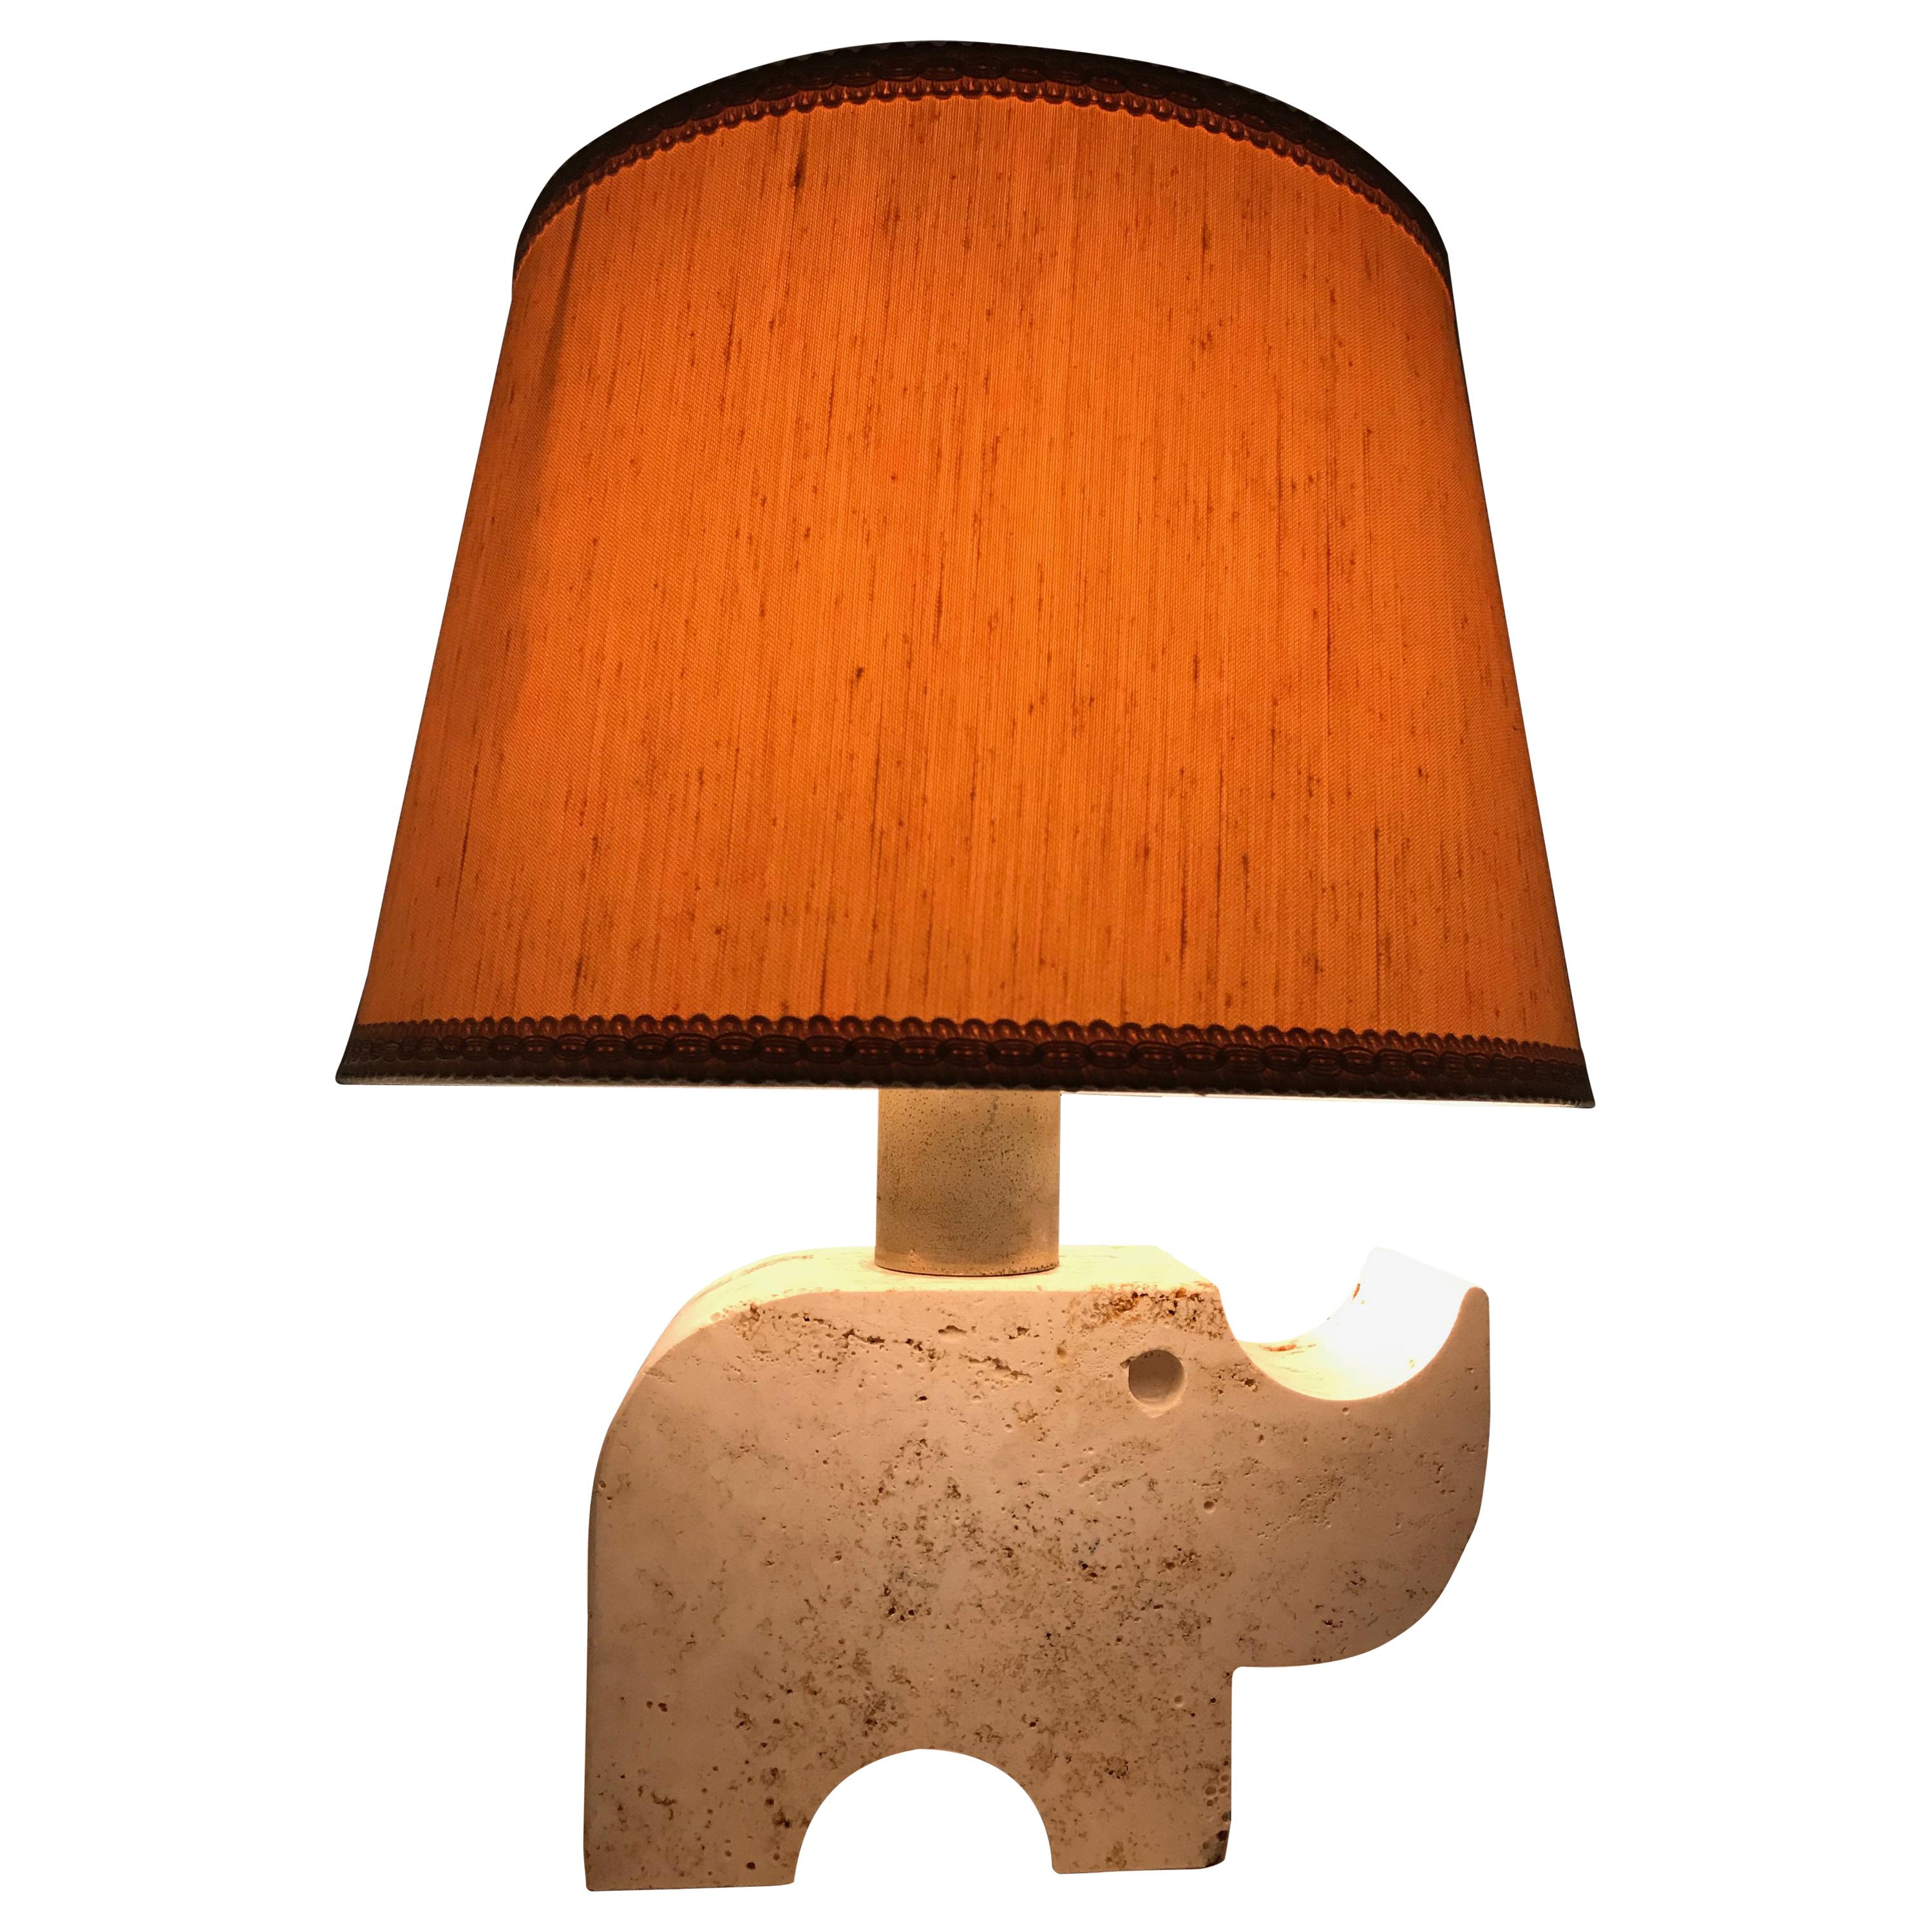 Travertine Rhinoceros Table Lamp by Fratelli Manelli, Italy, 1970s, Marble Light